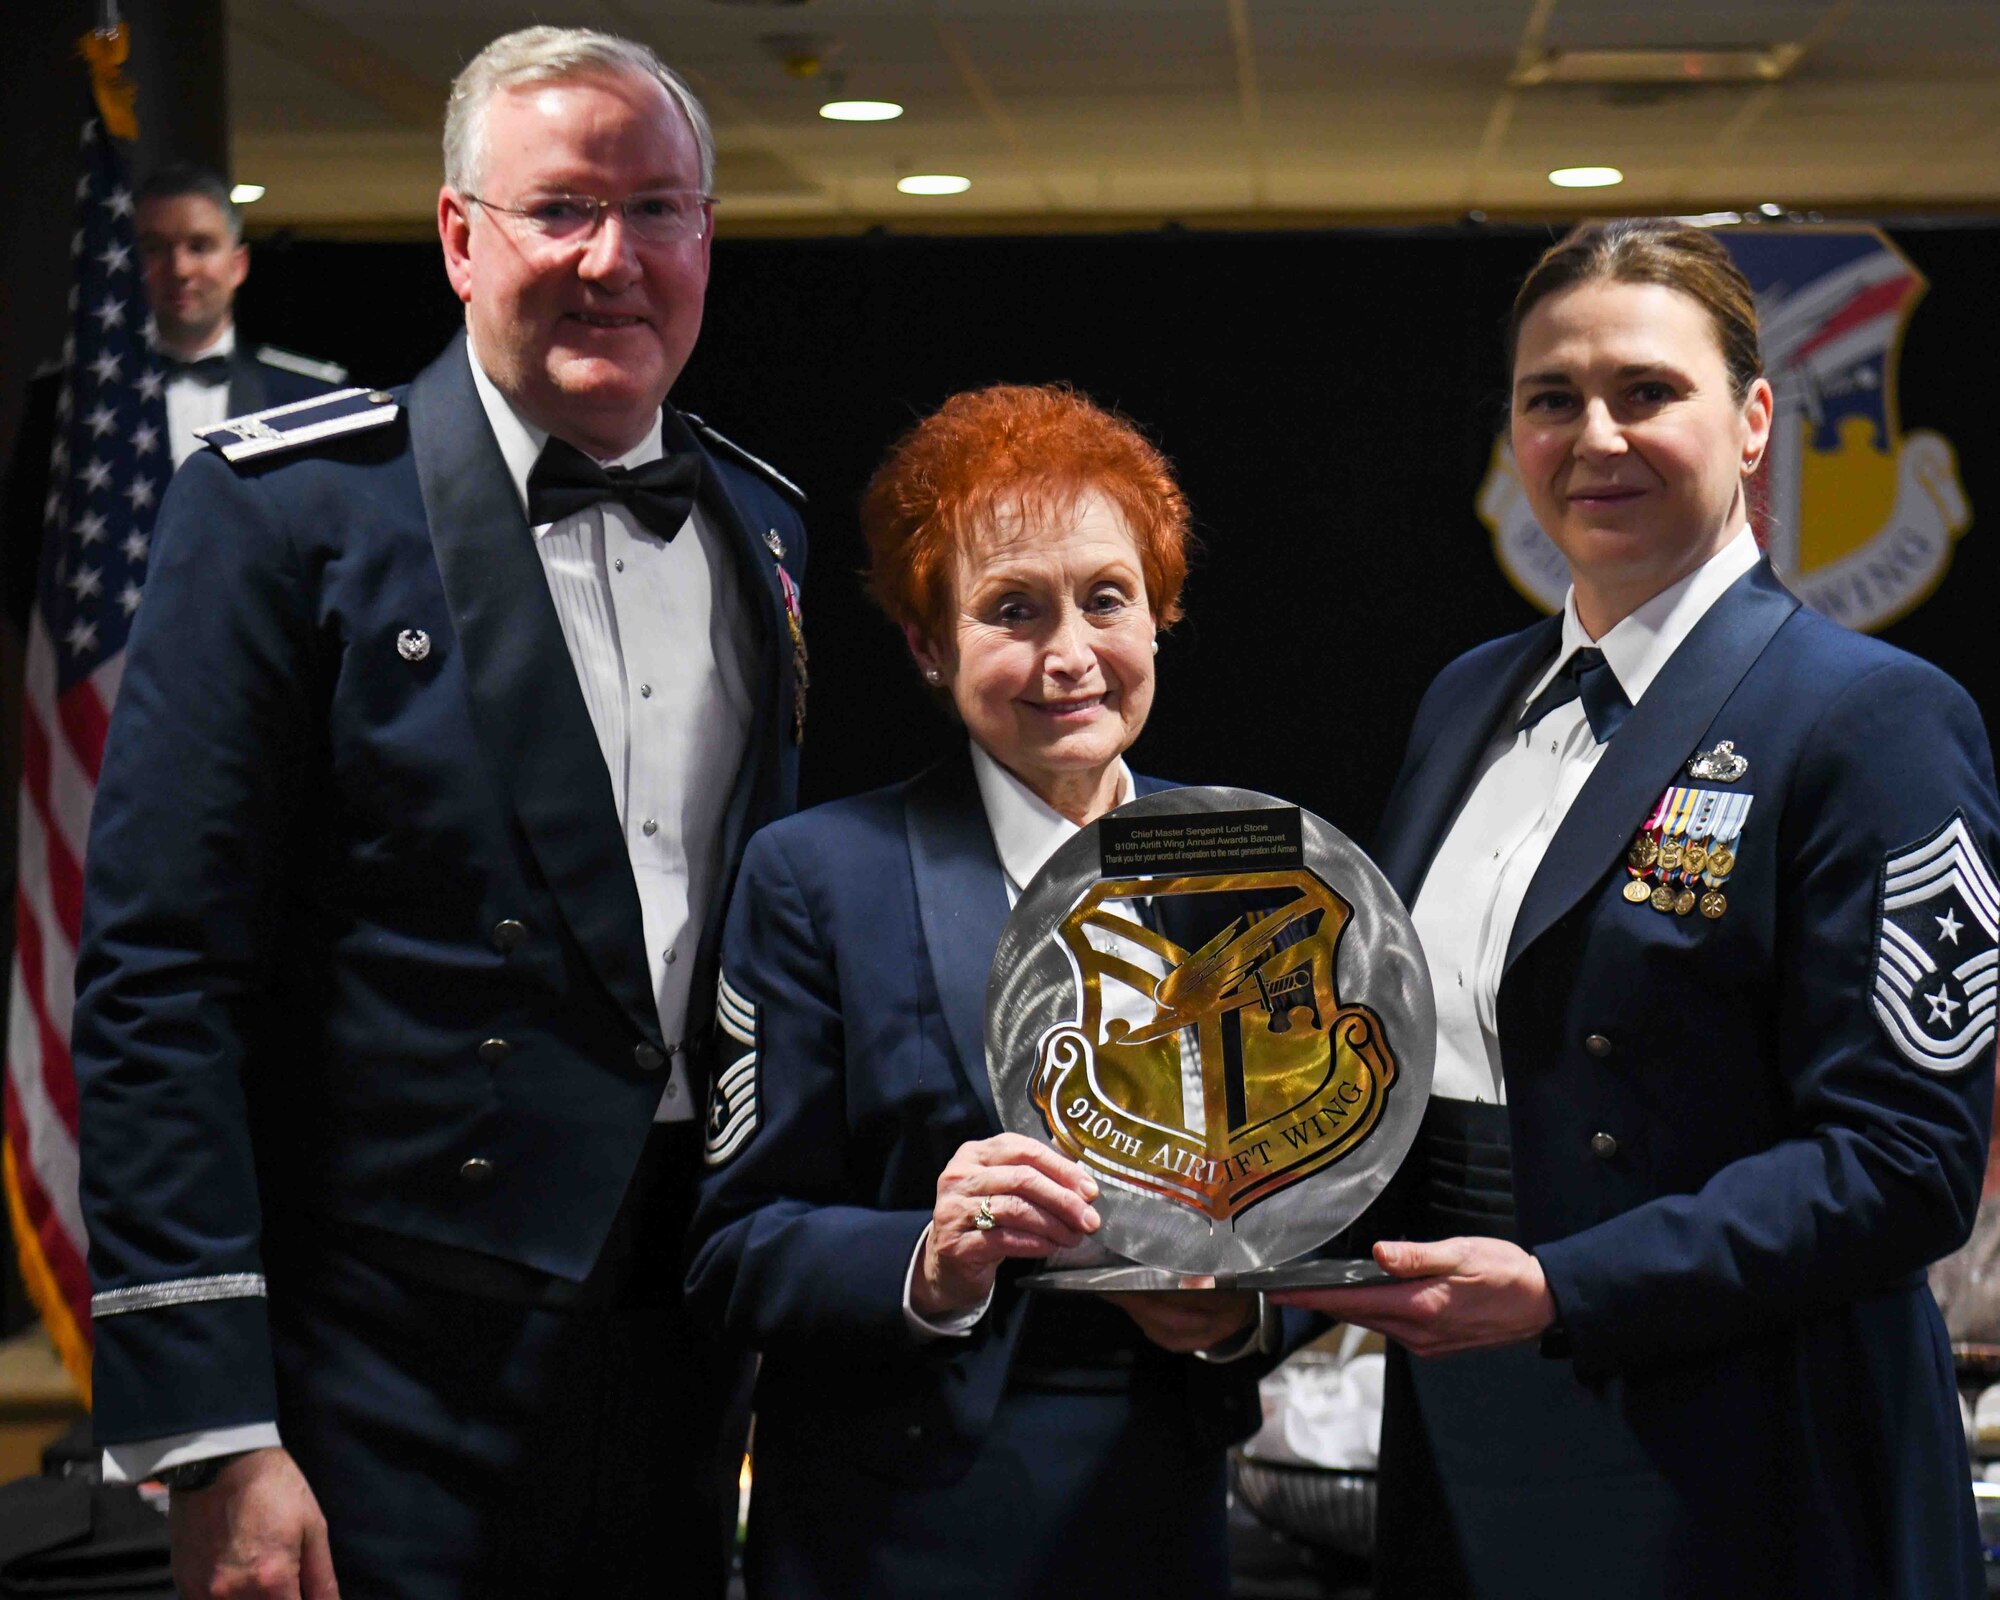 910th Airlift Wing Commander Col. Jeff Van Dootingh (left) and 910th Airift Wing Command Chief Master Sgt. Jennifer McKendree (right), present retired Chief Master Sgt. Lori Stone (center), guest speaker at the 910th Airlift Wing’s annual awards banquet, with a wing shield plaque, March 4, 2023, for her prior service and continued support of Youngstown Air Reserve Station, Ohio.